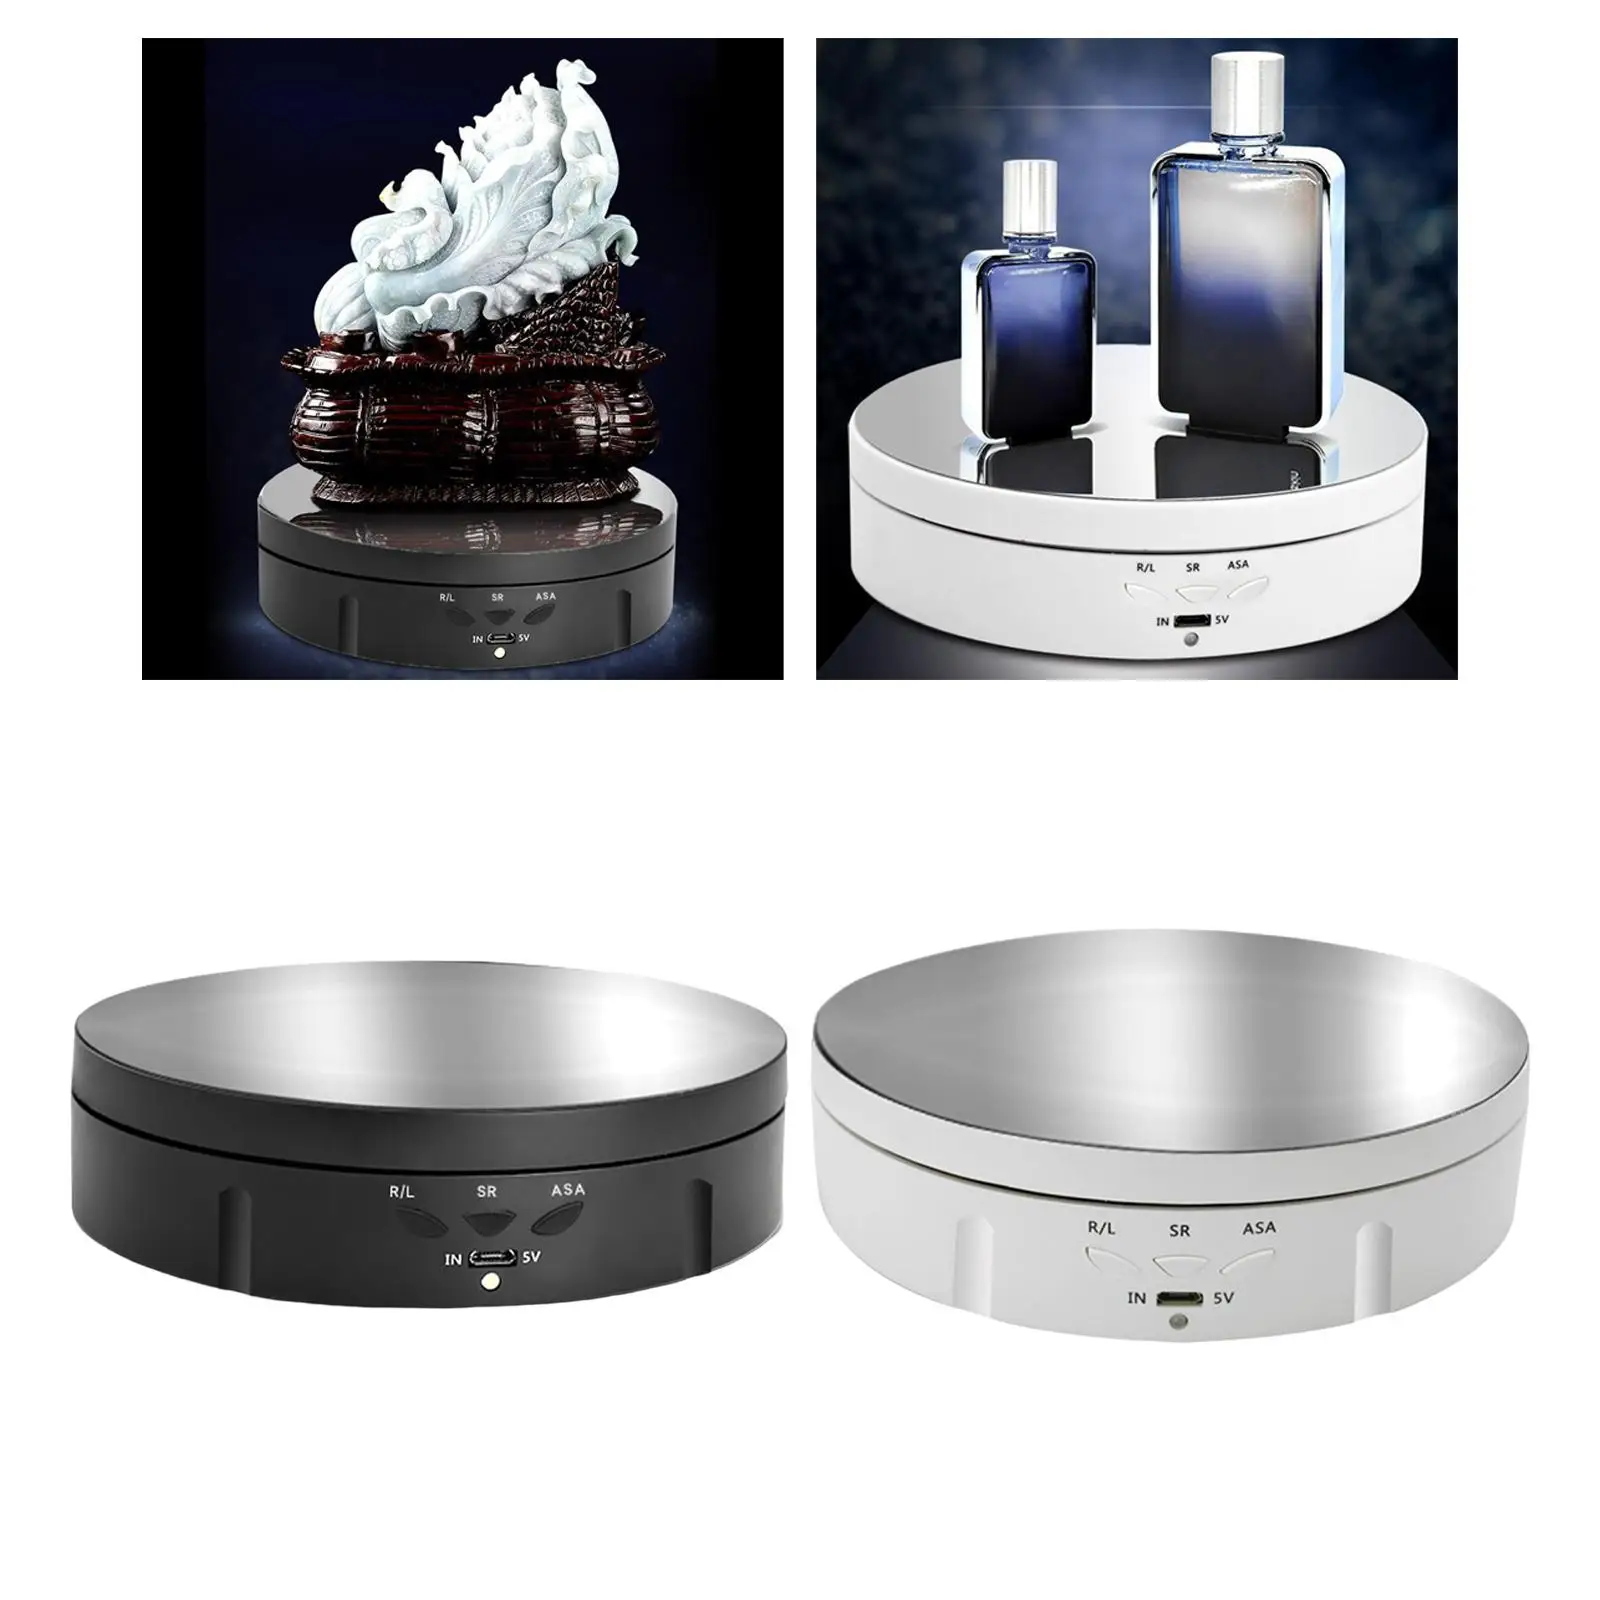 Motorized Rotating Display Stand with USB Power Cable Rotating Turntable Jewelry Holder for Jewelry 3D Models Watch Cake